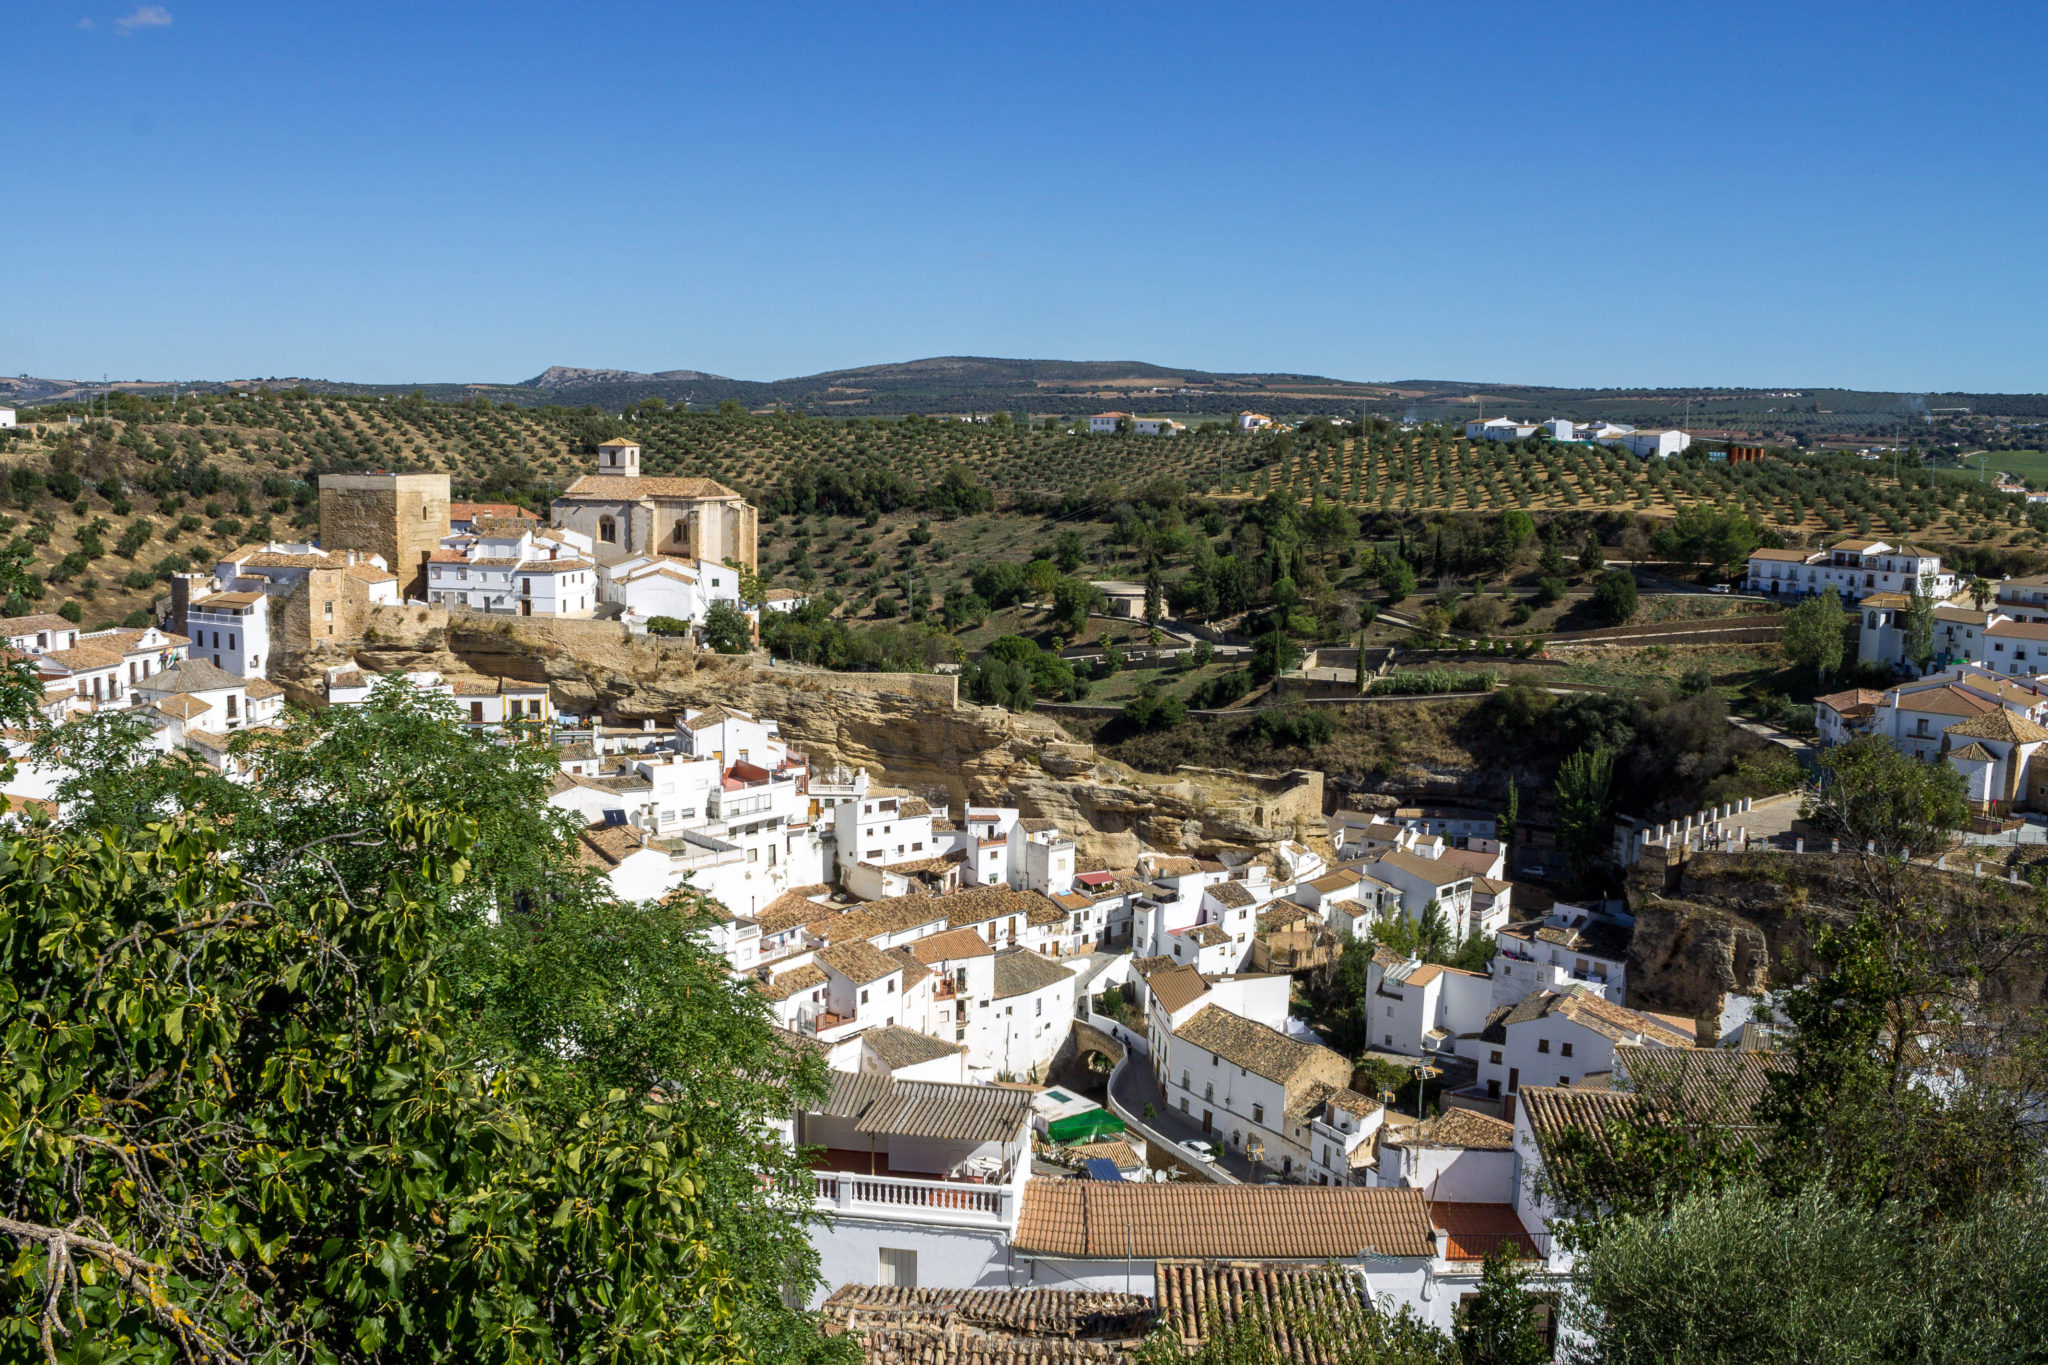 The spectacular Spanish town that stands on top of a cliff 50